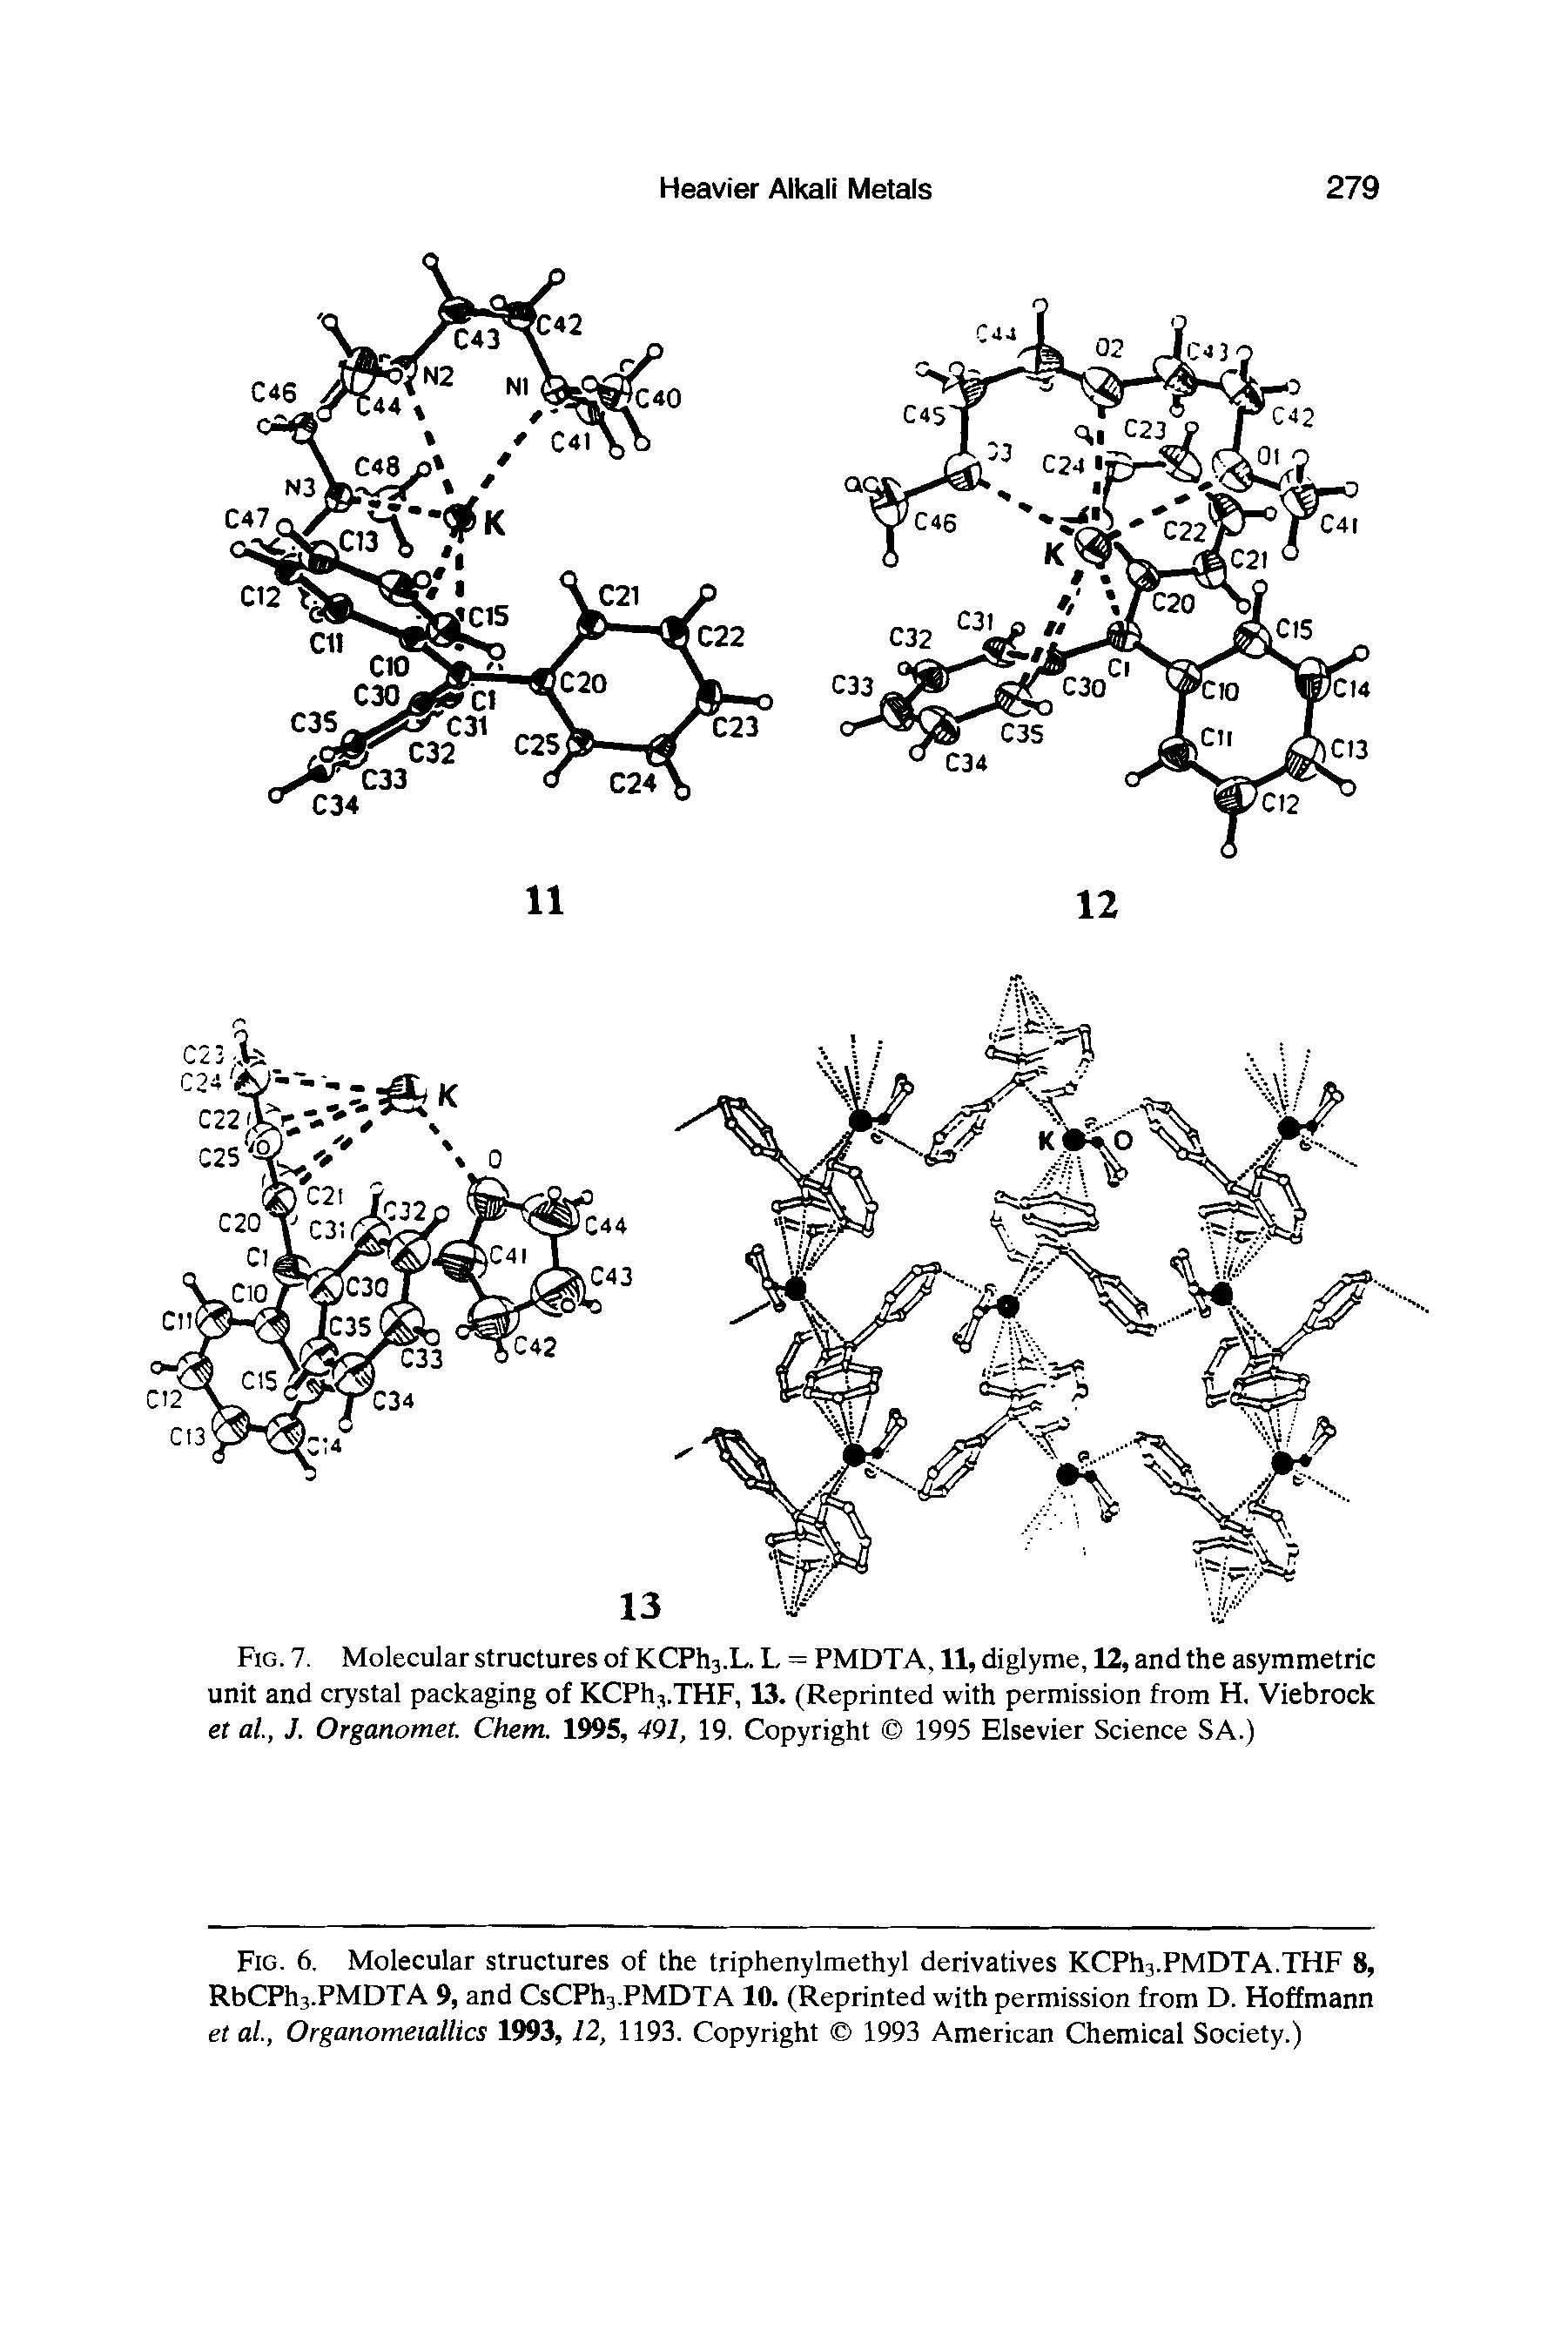 Fig. 6. Molecular structures of the triphenylmethyl derivatives KCPh3.PMDTA.THF 8, RbCPh3.PMDTA 9, and CsCPh3.PMDTA 10. (Reprinted with permission from D. Hoffmann et al., Organomeiallics 1993, 12, 1193. Copyright 1993 American Chemical Society.)...